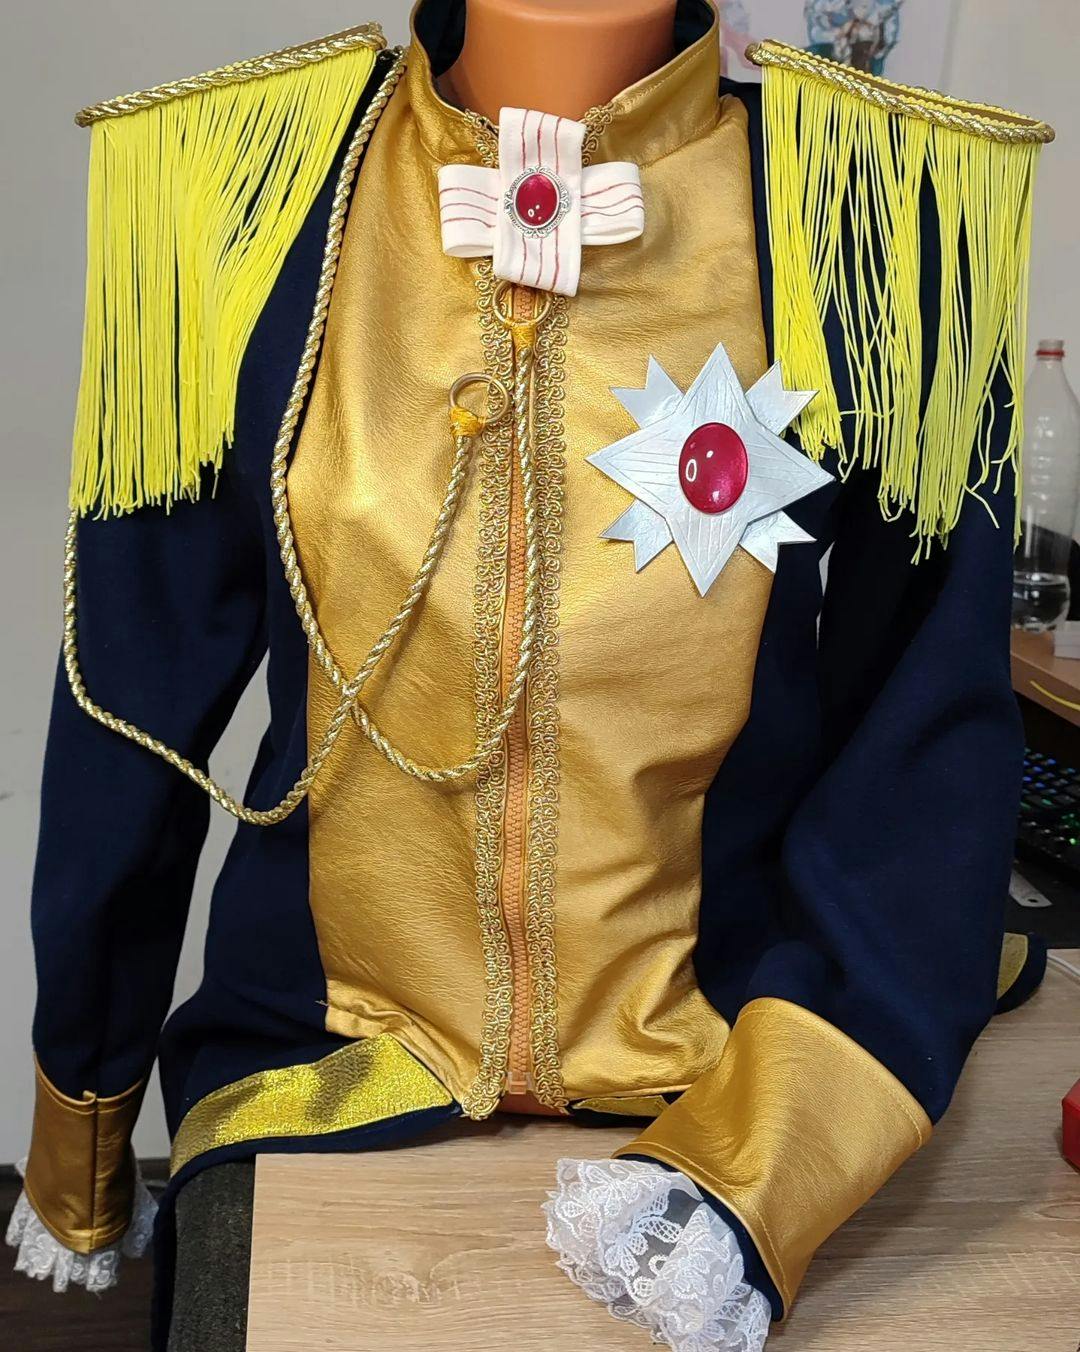 Detailed Oscar Francois from Rose of Versailles cosplay commission made by Merrlia Cosplay.